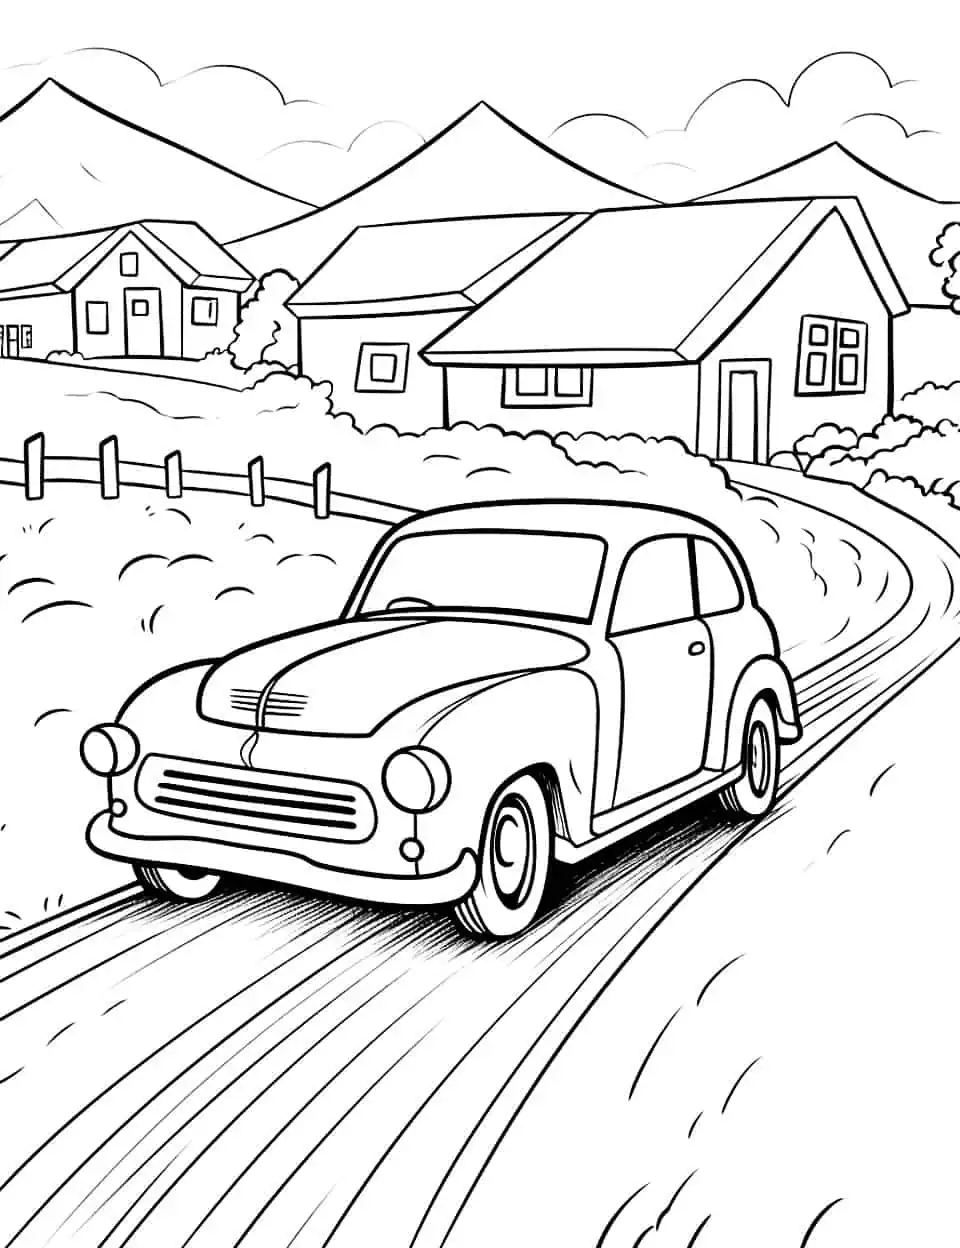 The Old Town Road Car Coloring Page - An old, vintage car driving down a countryside road.